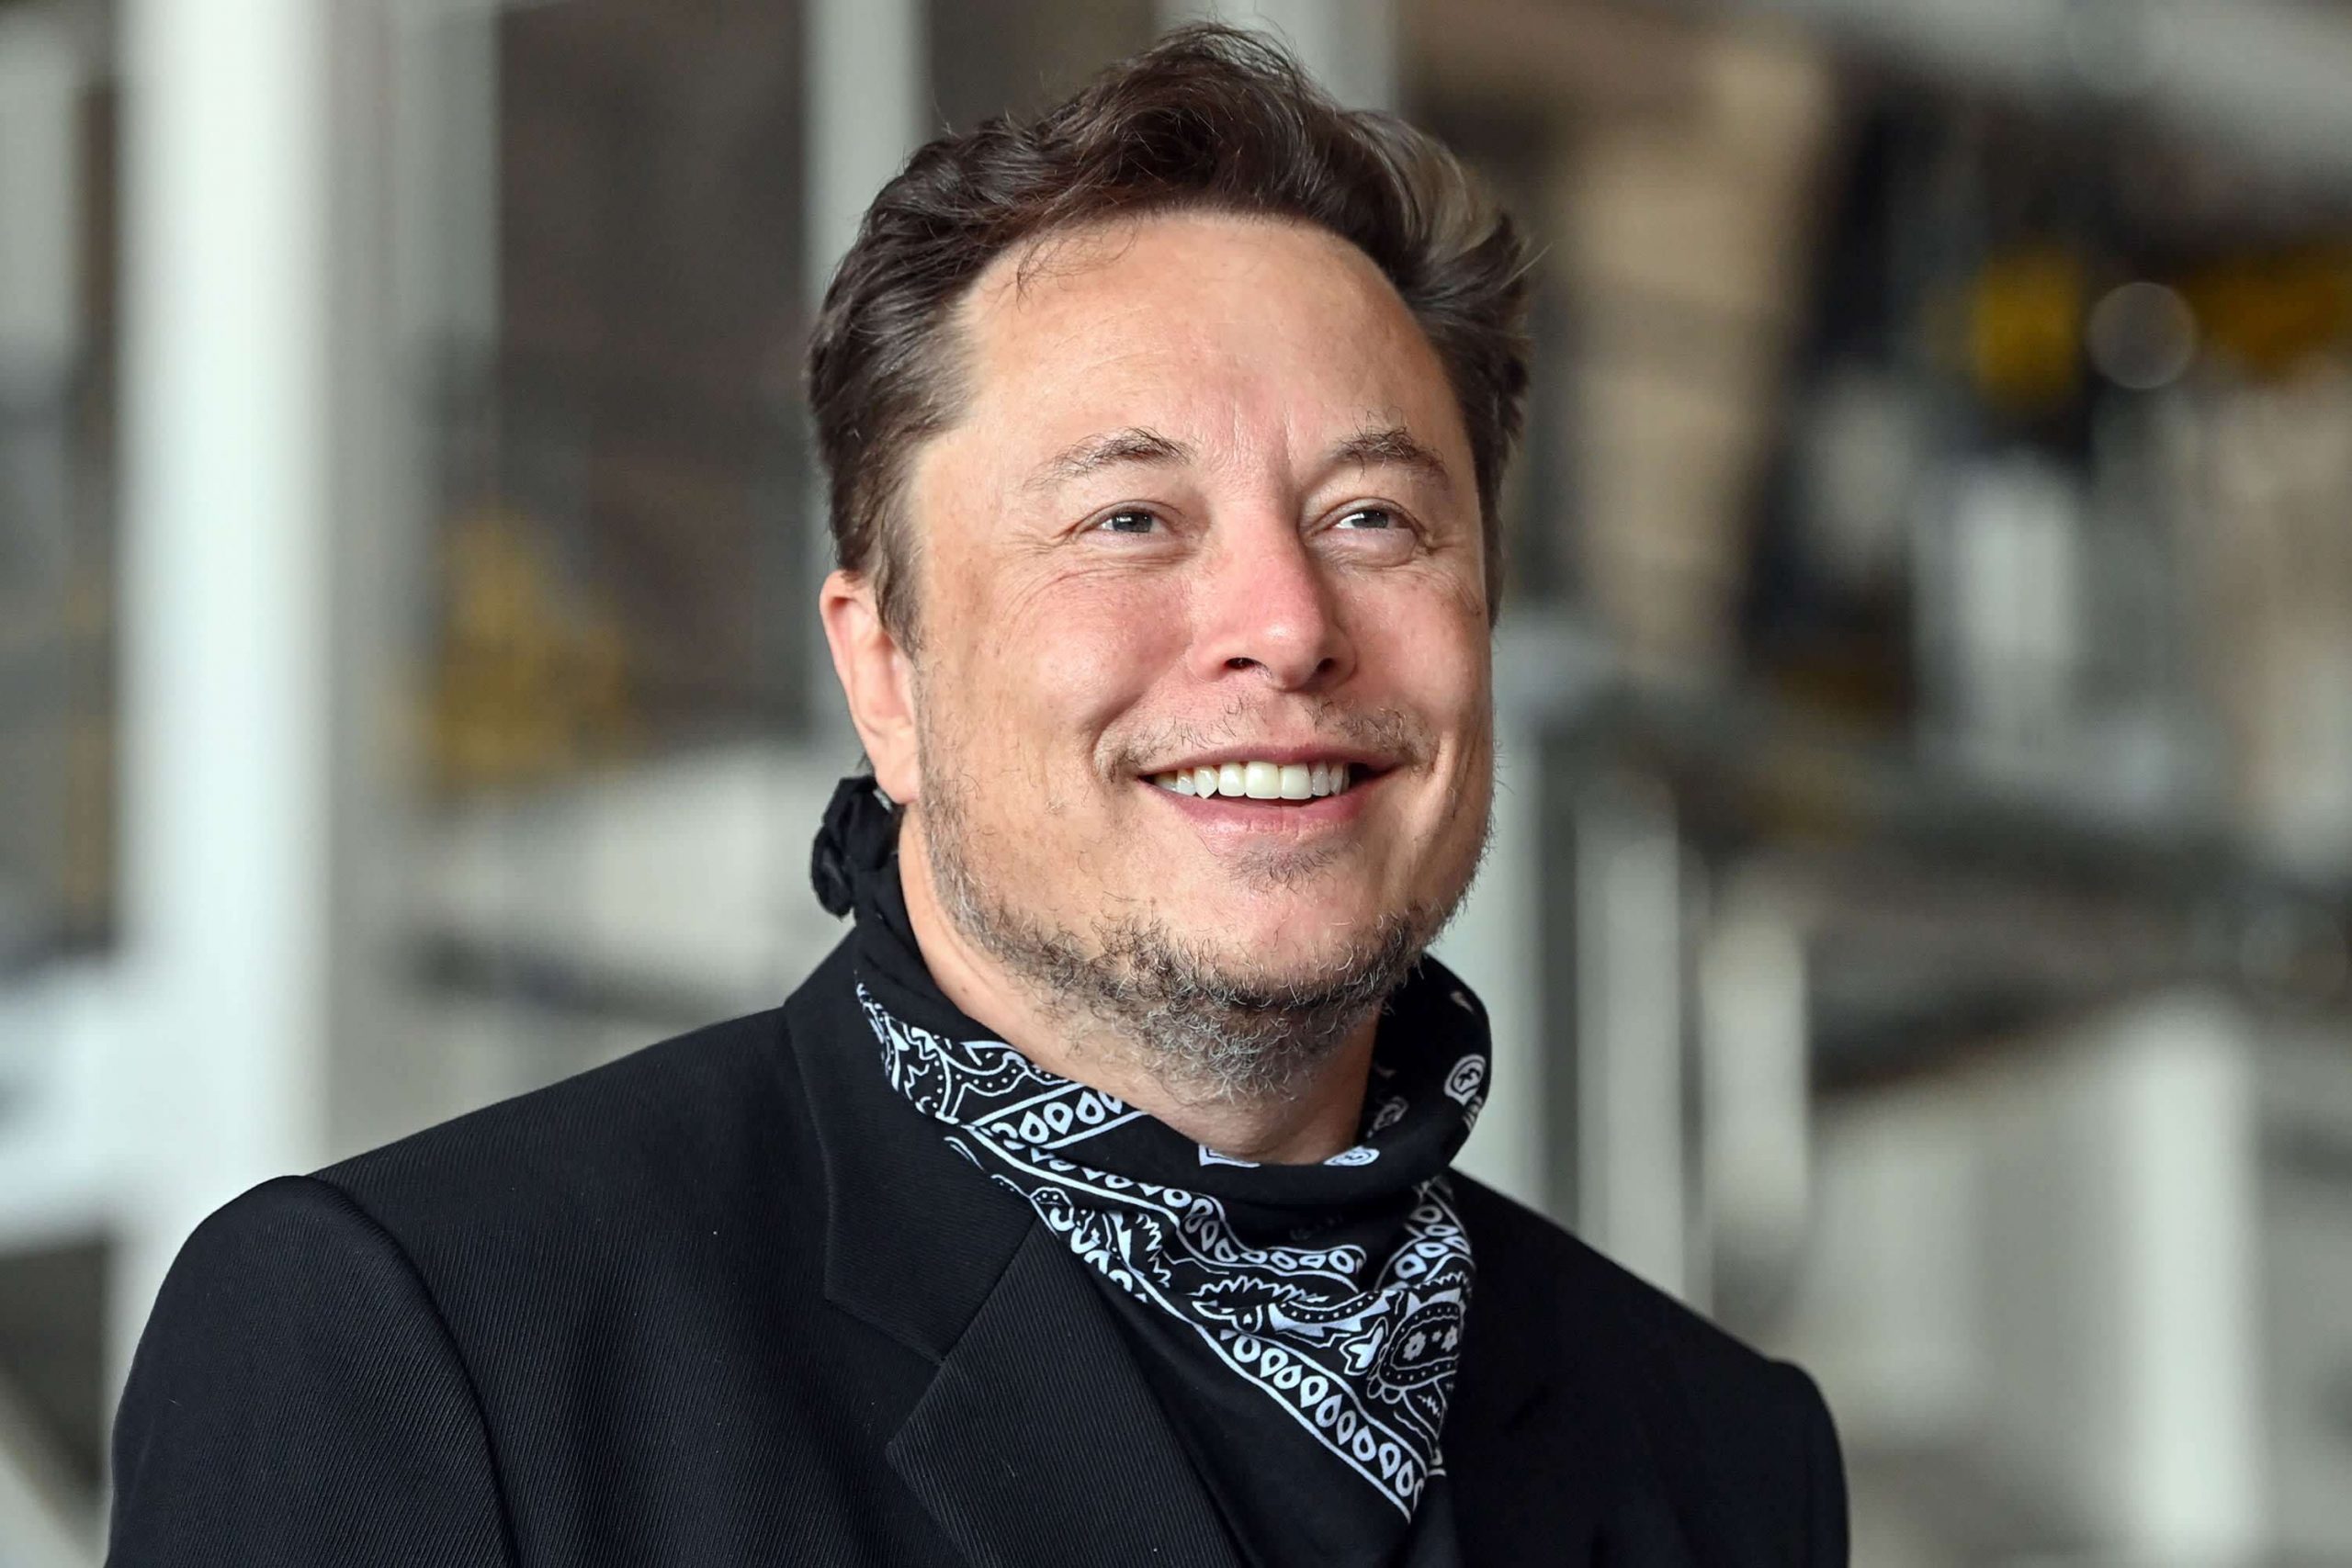 Is Elon Musk African? Here’s The Truth About His African Ethnicity And Heritage